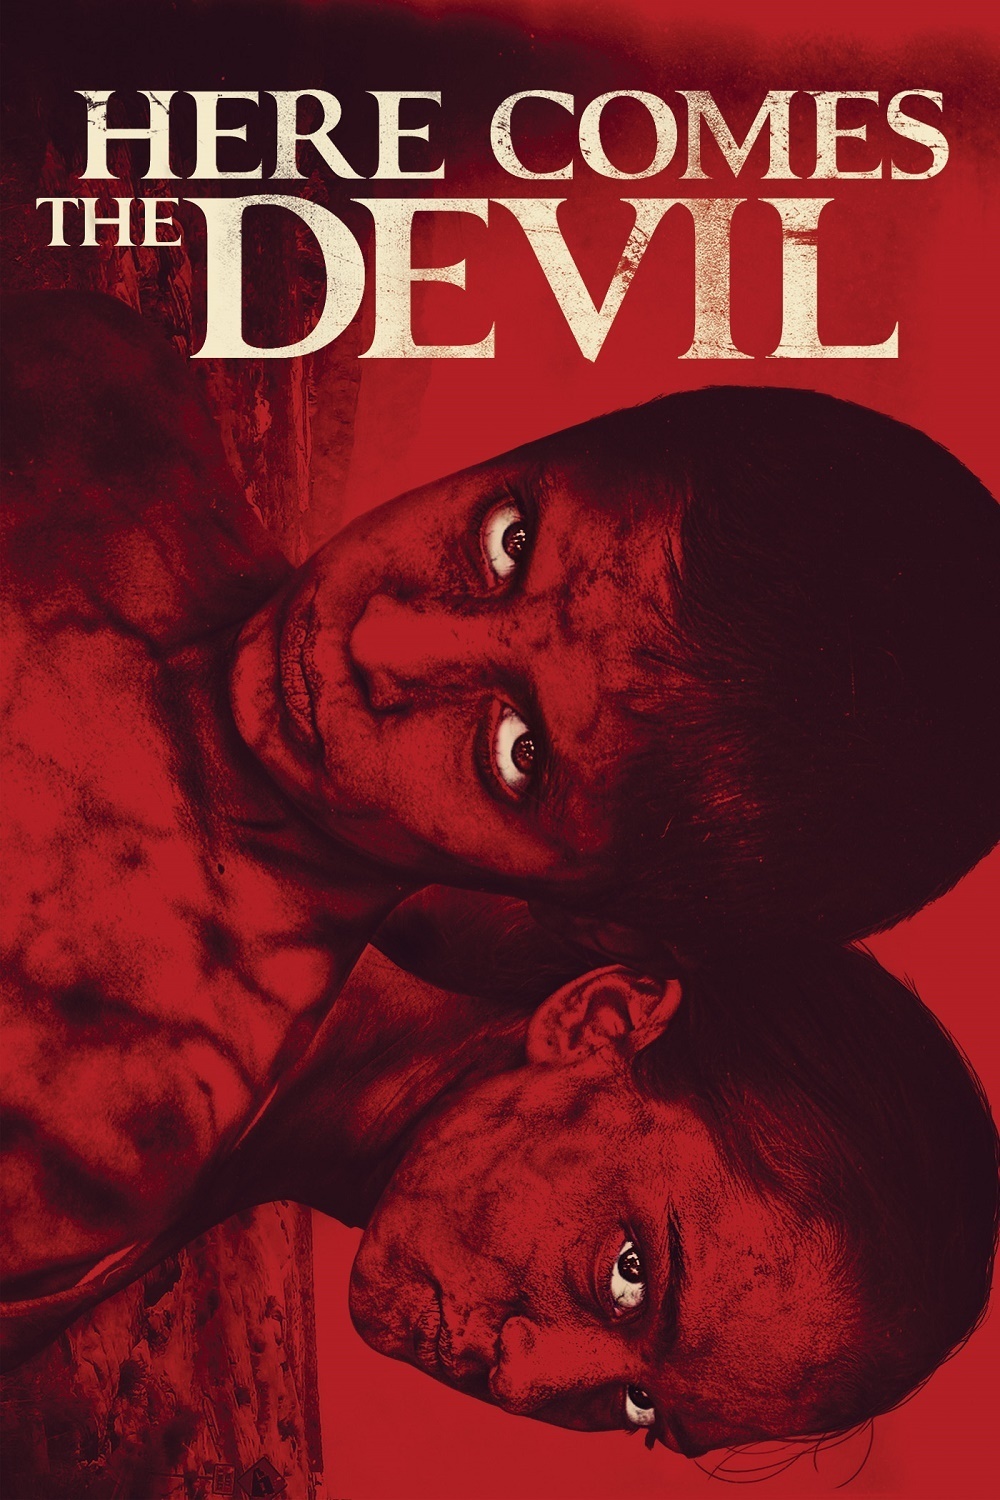 Try The Devil Slot From Gamescale With No Download